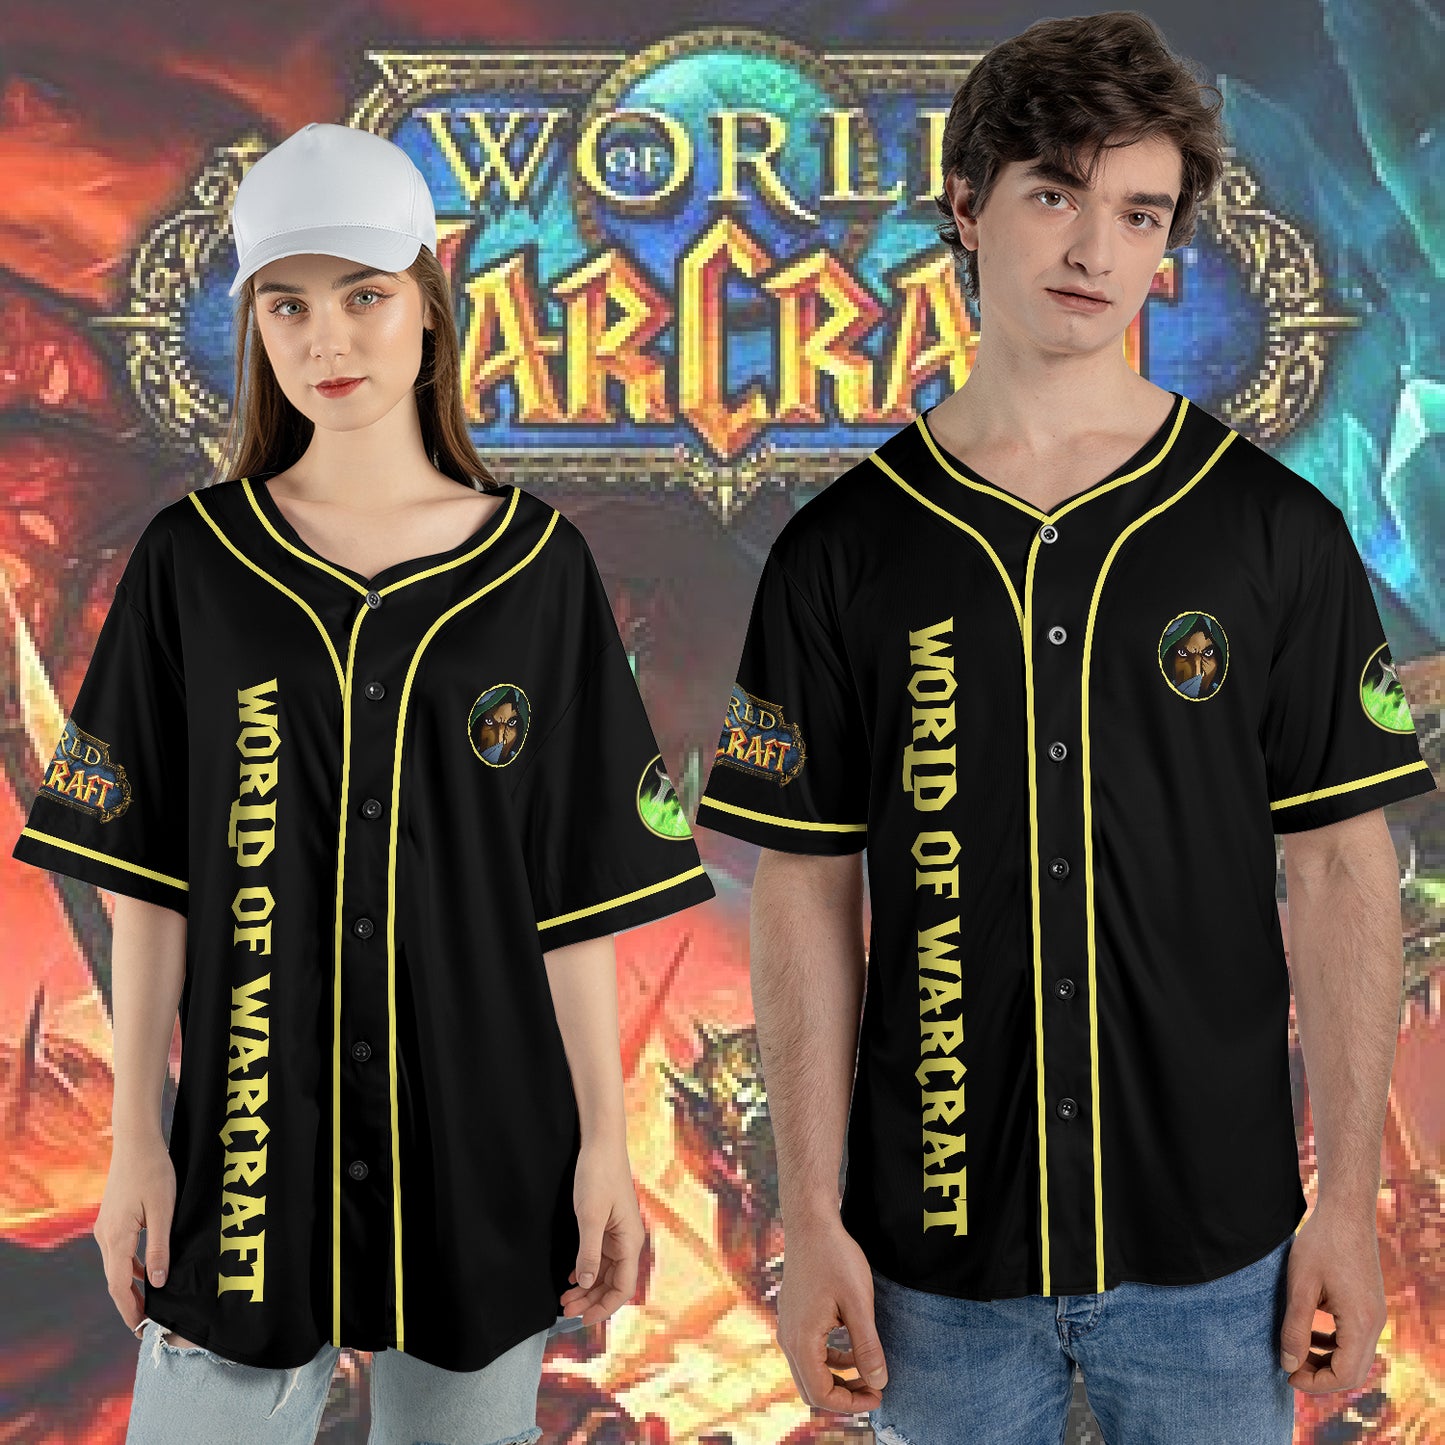 Wow Class Subtlety Rogue Guide AOP Baseball Jersey Without Piping